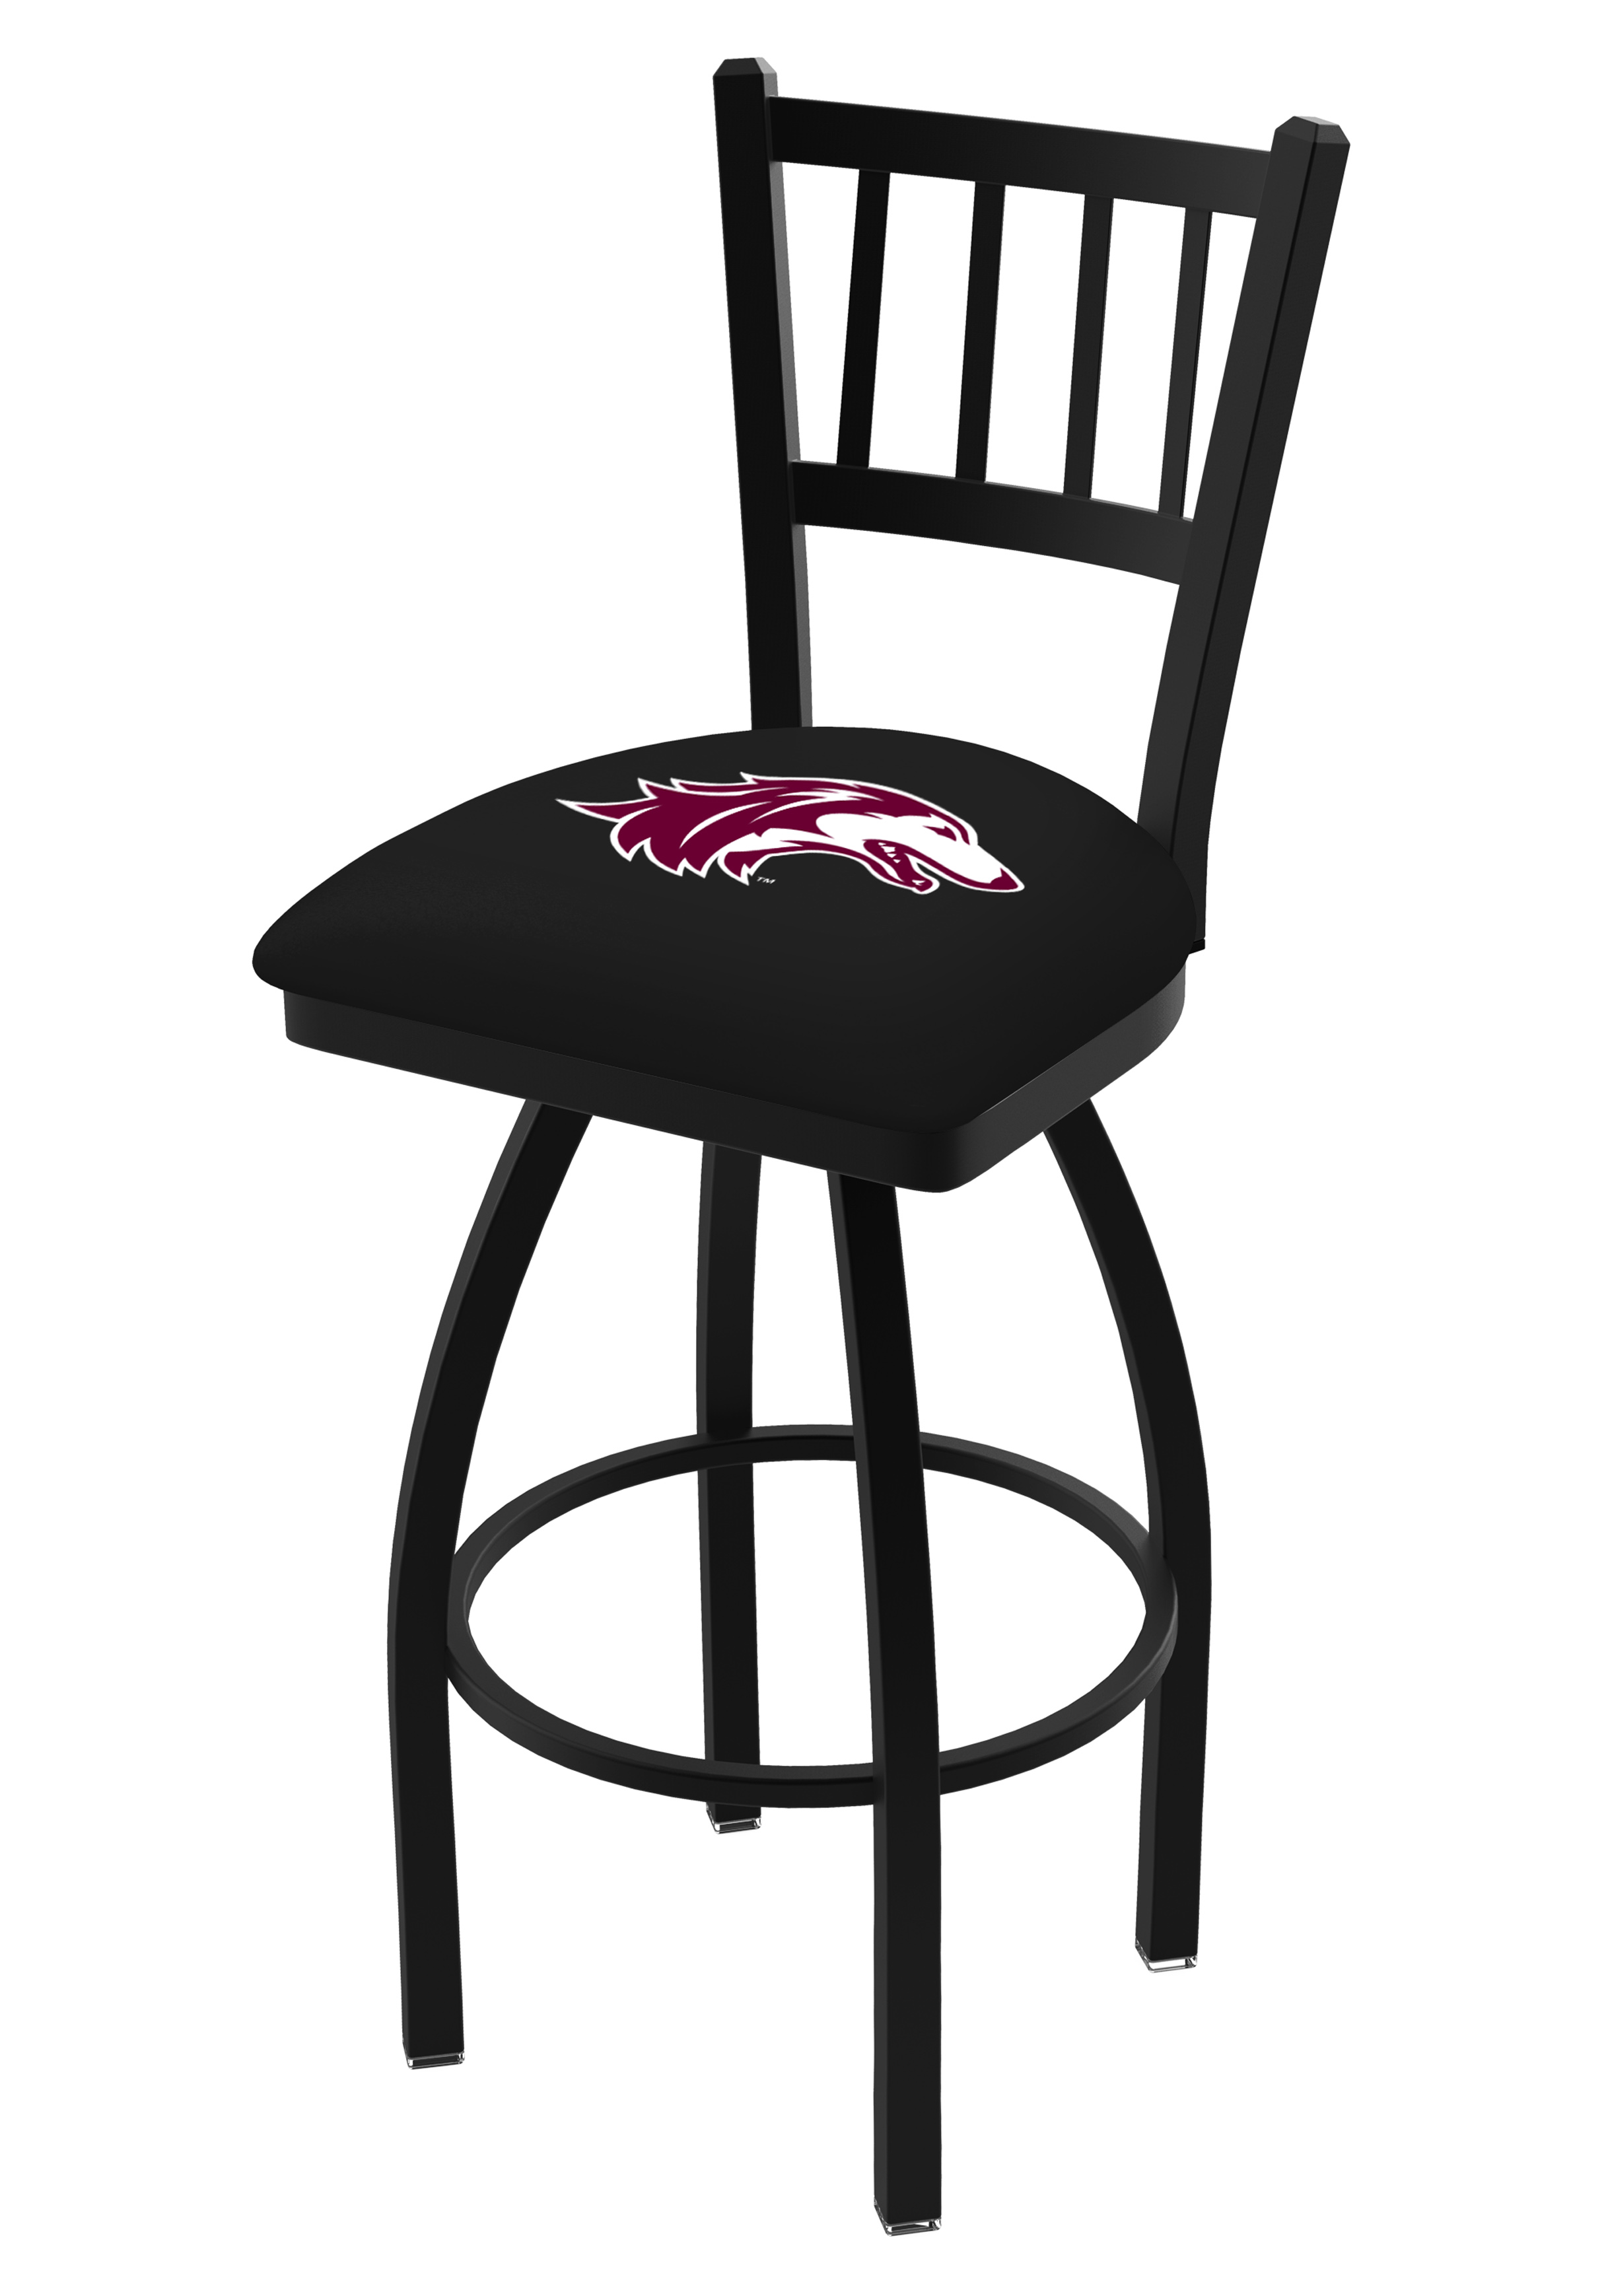 Picture of Holland Bar Stool L01830SouIll 30 in. Southern Illinois Bar Stool with Salukis Logo Swivel Seat